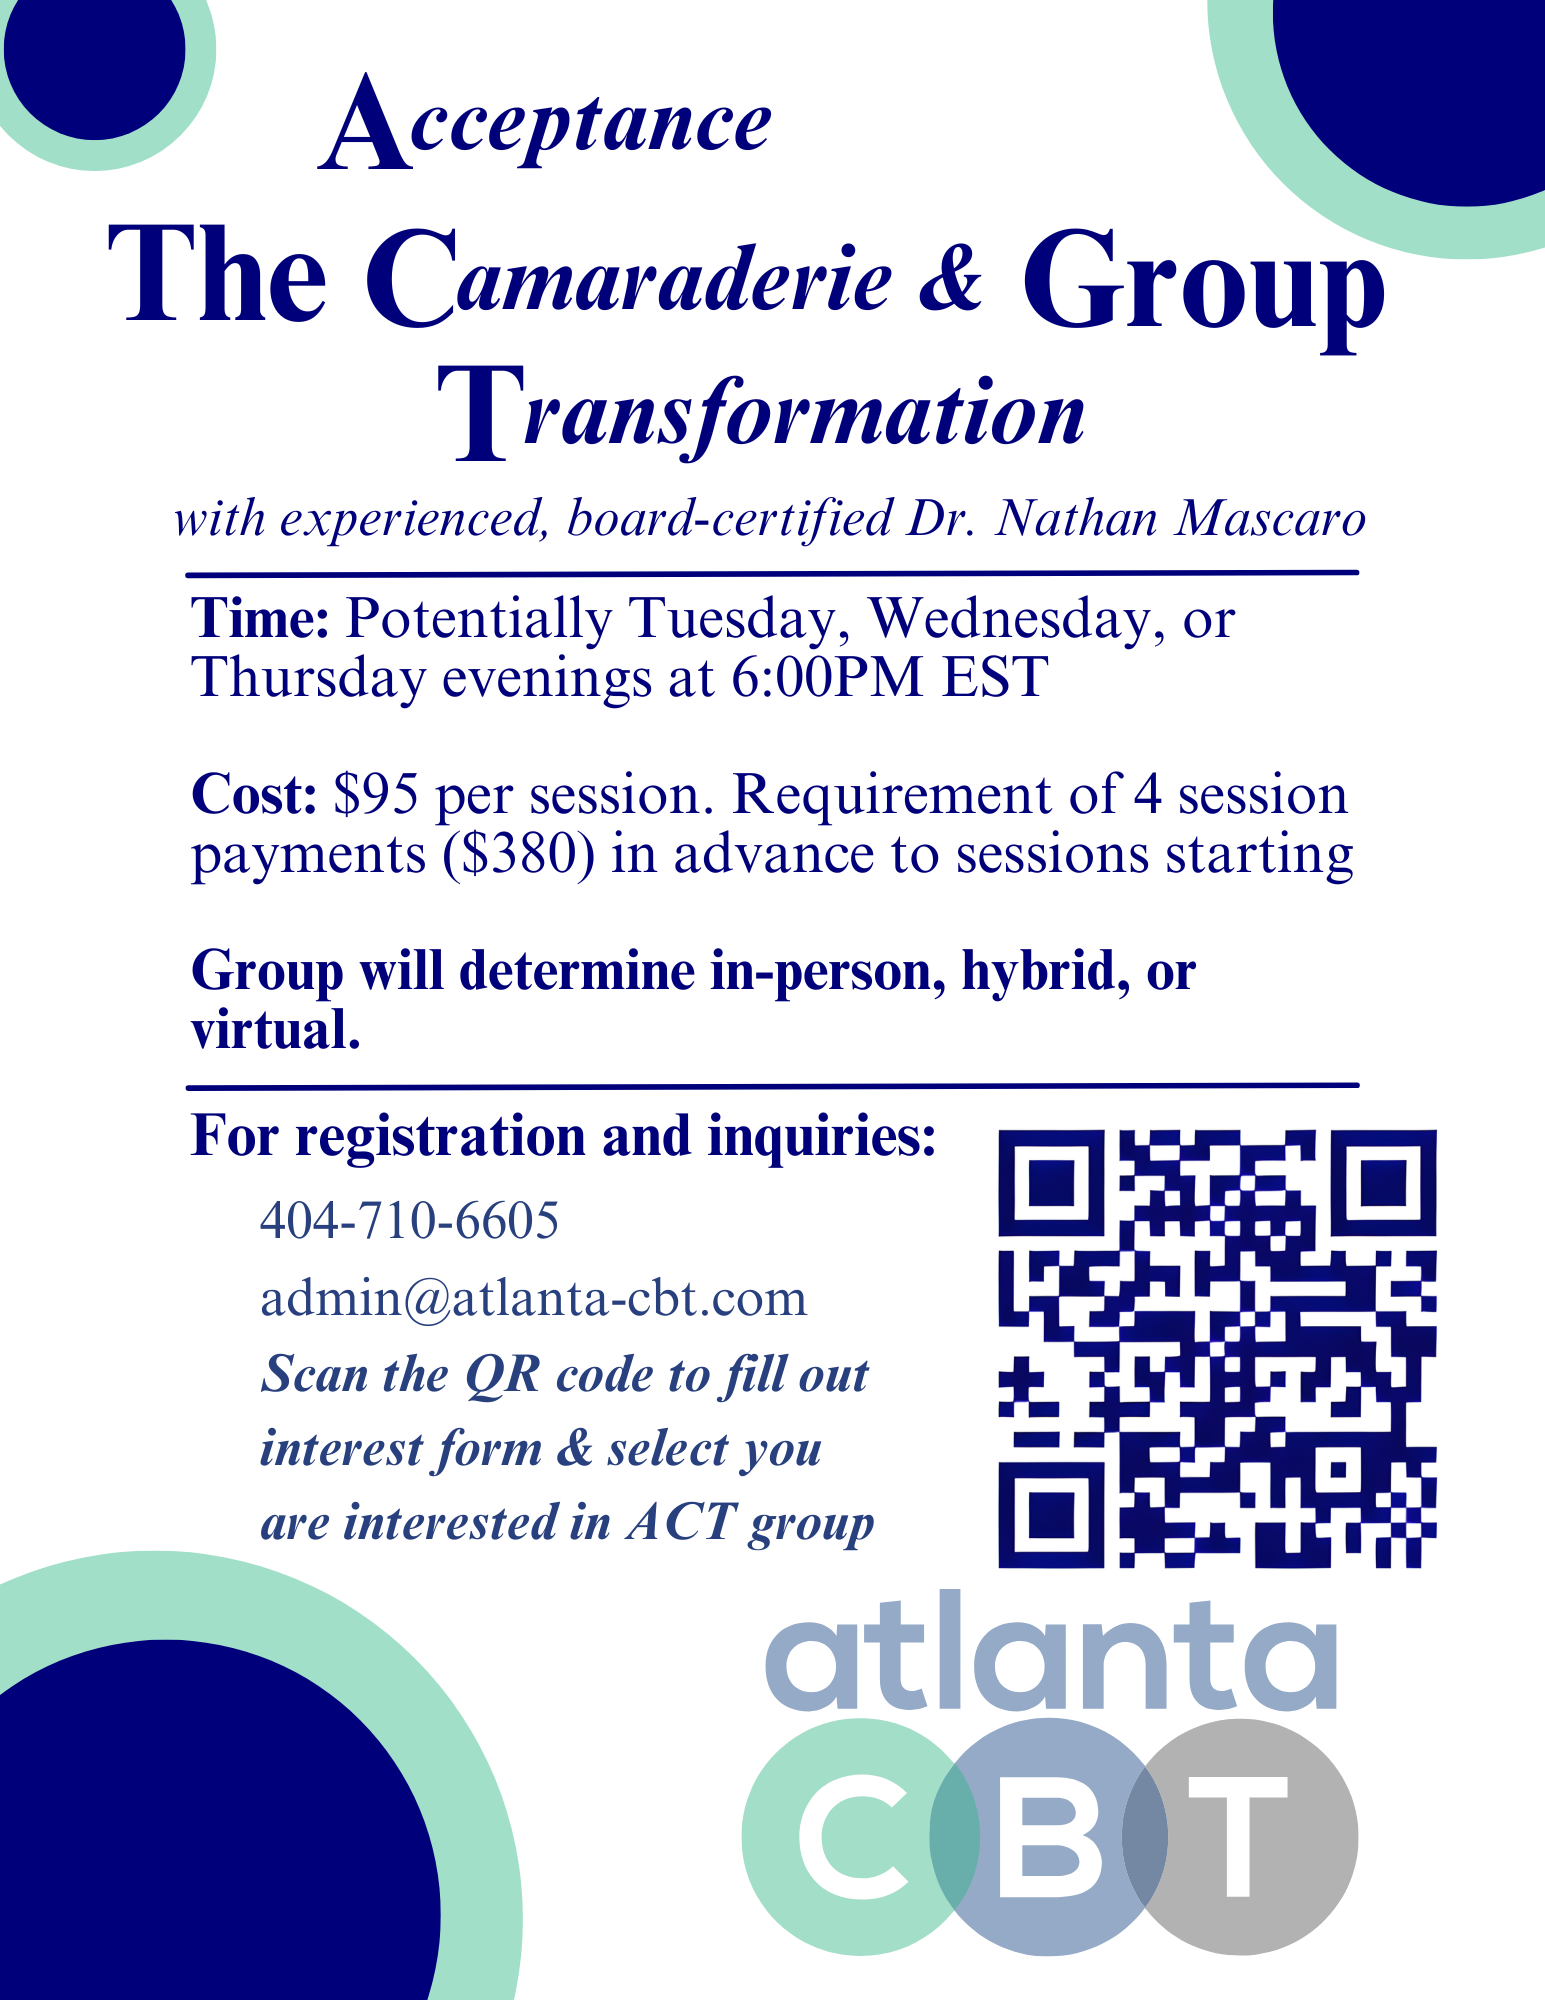 The ACT (Acceptance, Camaraderie, and Transformation) Group will be lead by board certified Dr. Nathan Mascaro. The group will determine when and how they would like to meet, either Tuesday, Wednesday, or Thursday via in-person, hybrid, or telehealth. The cost of the group is $95 per session. 